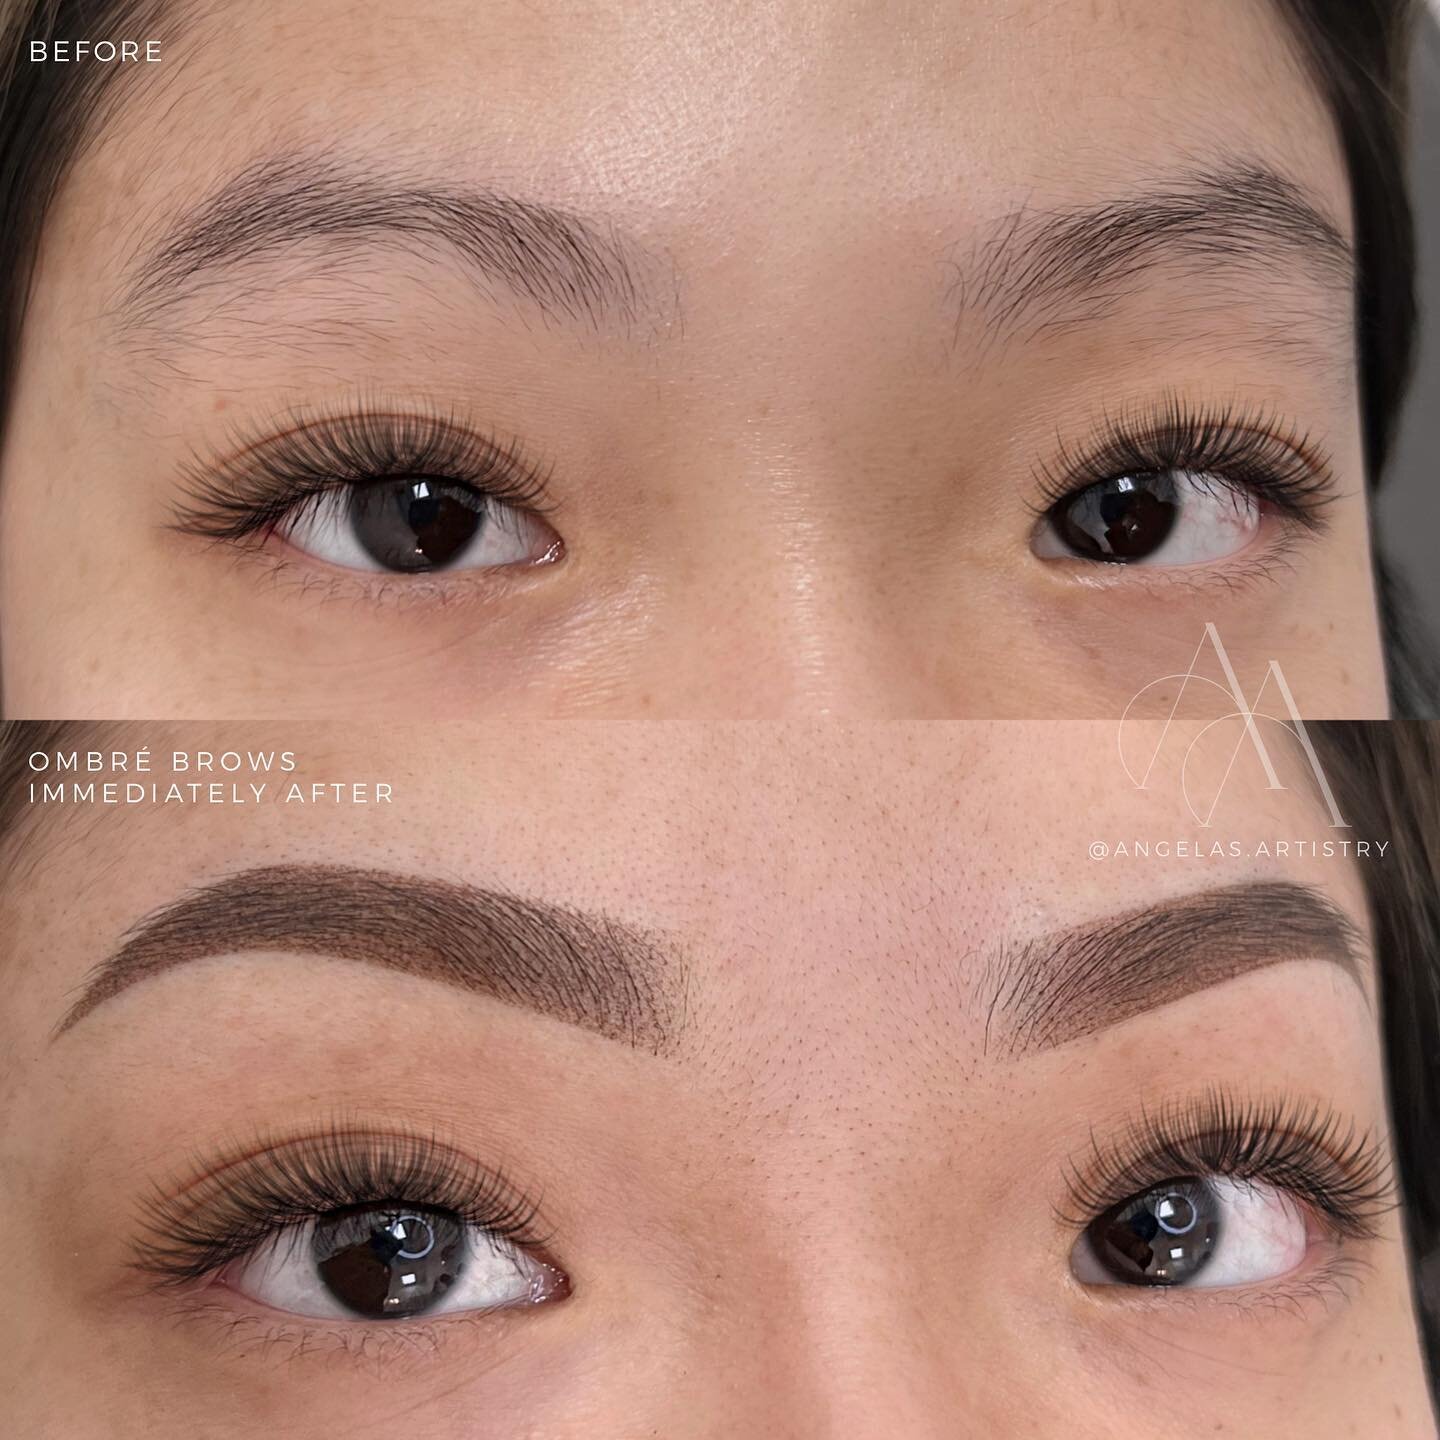 Ombr&eacute; Powder Brows Transformation

Great for definition, the shape of the brows stay true and age the best over time 💖

For some people waxing, threading and tinting will not ever give them the results they need because of the gaps in their b